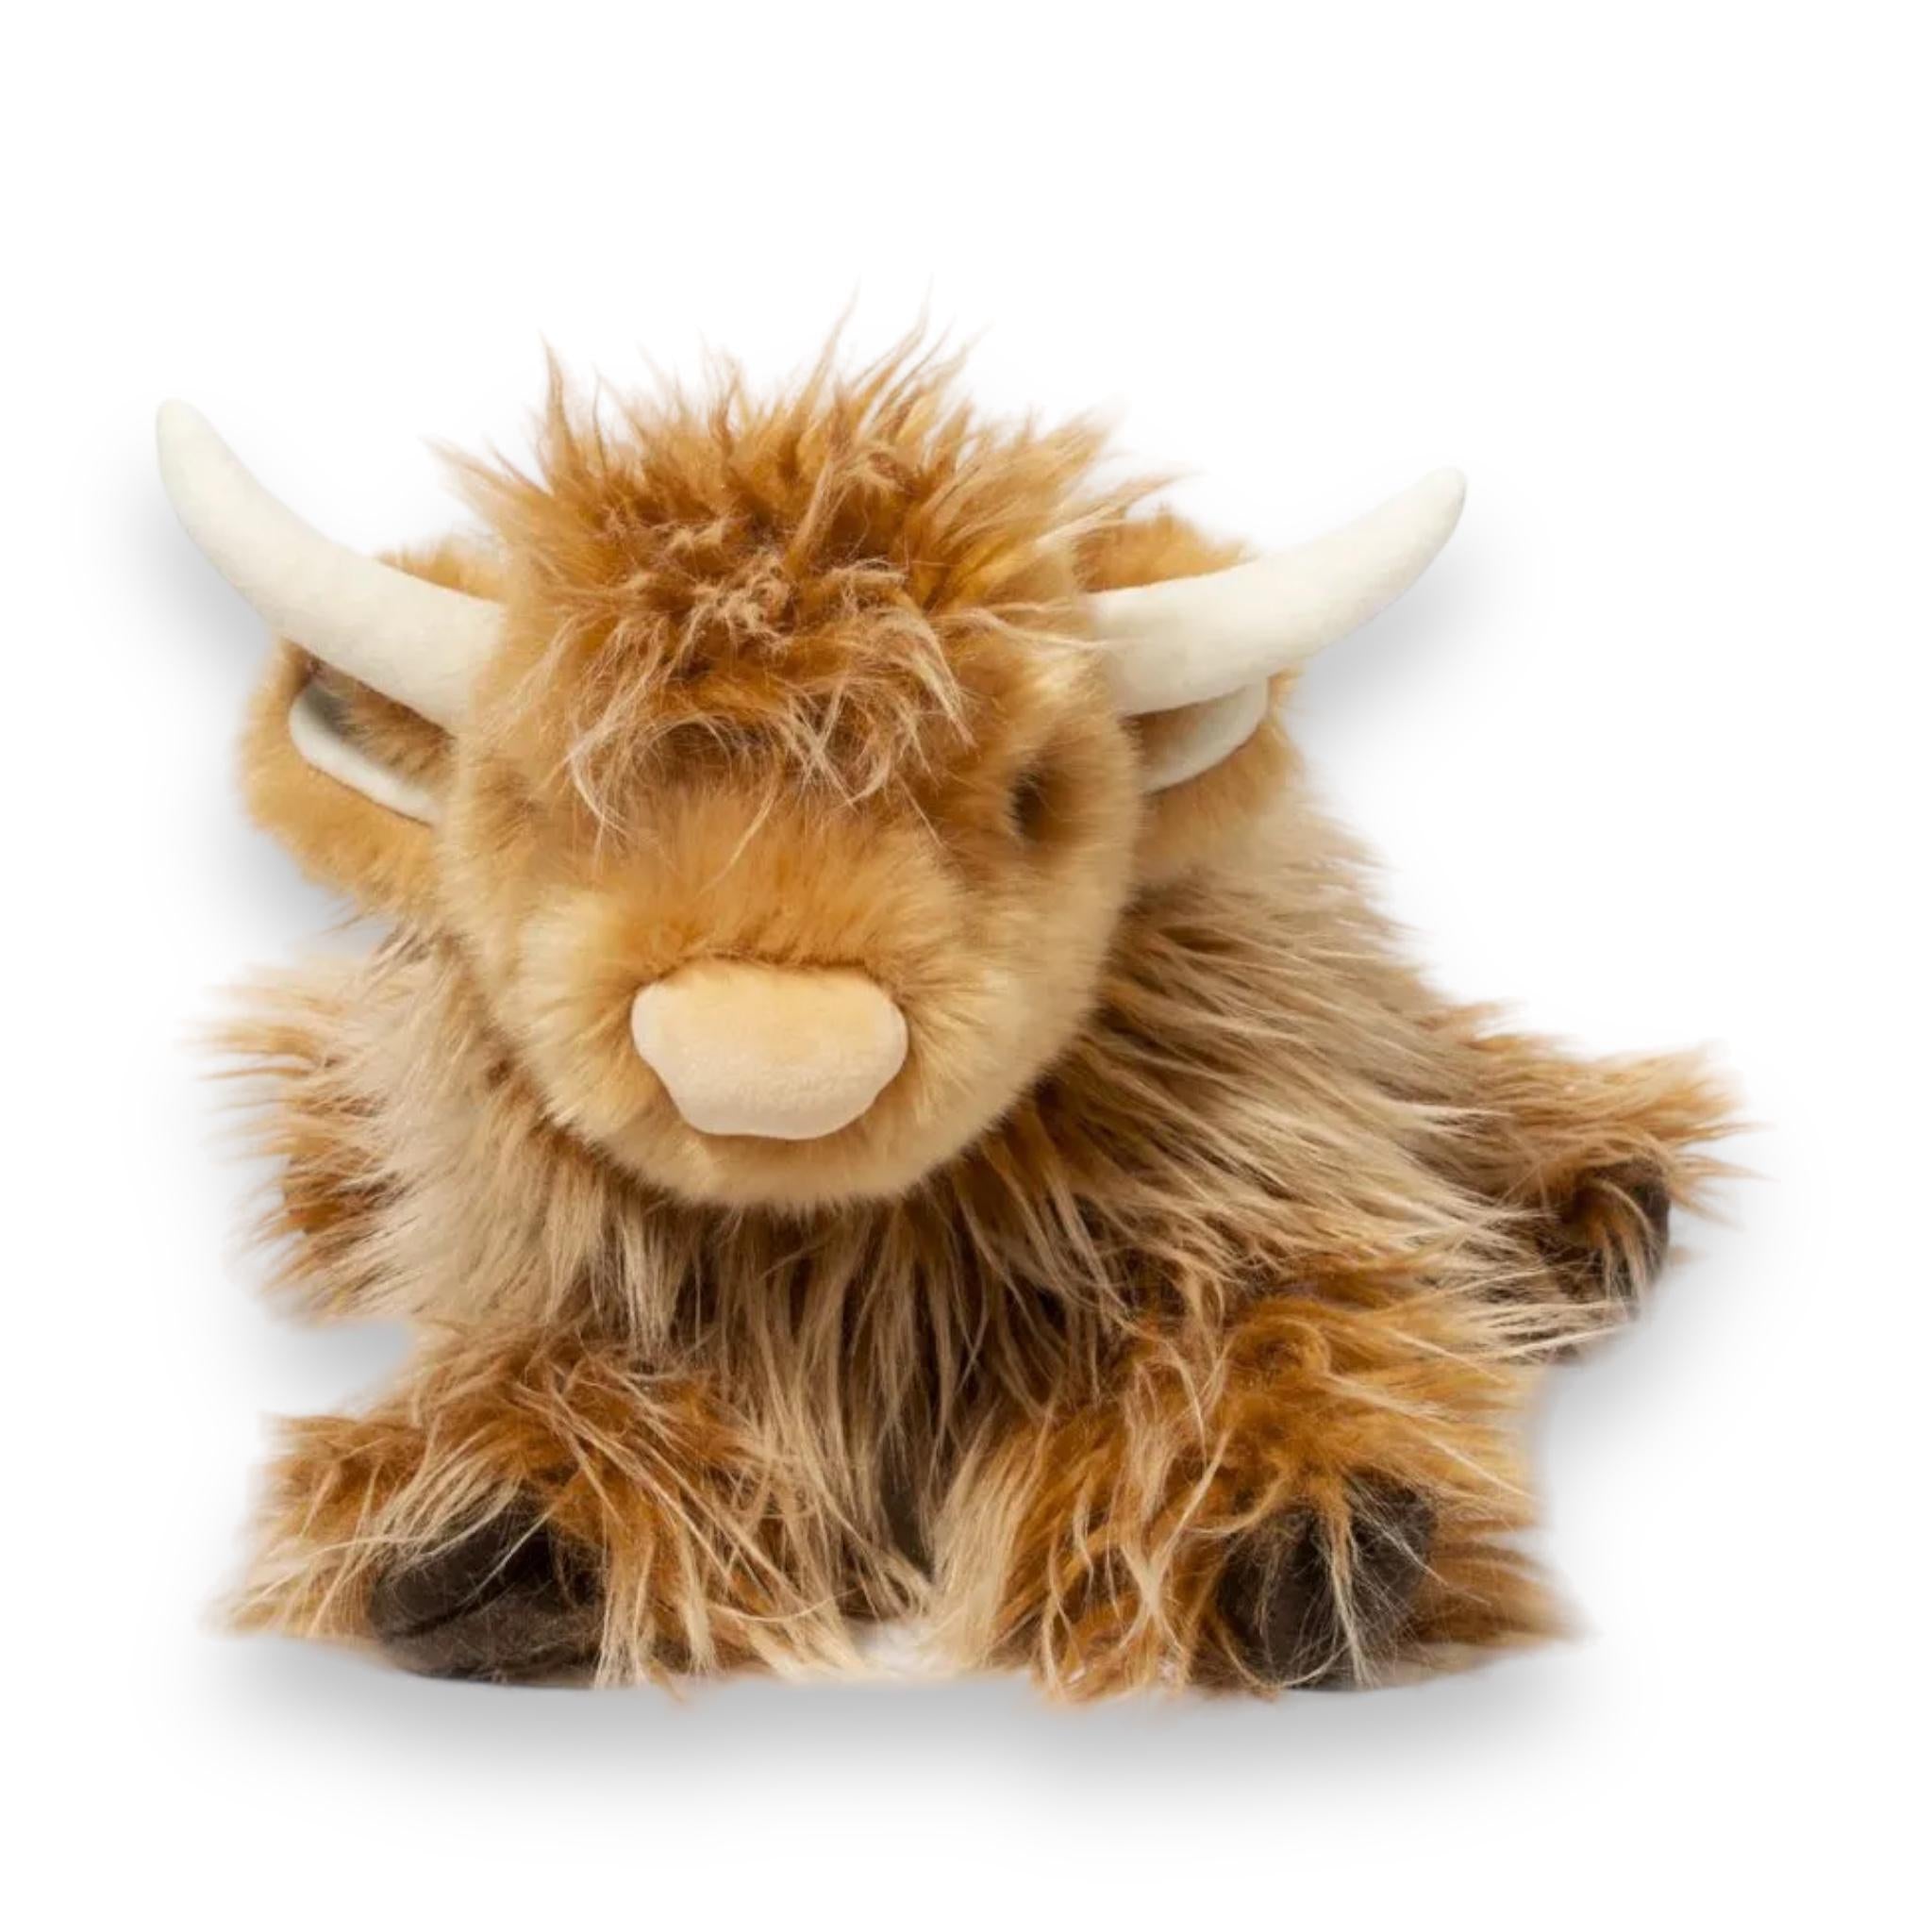 Wallace Dlux Highland Cow Plush Toy 4494